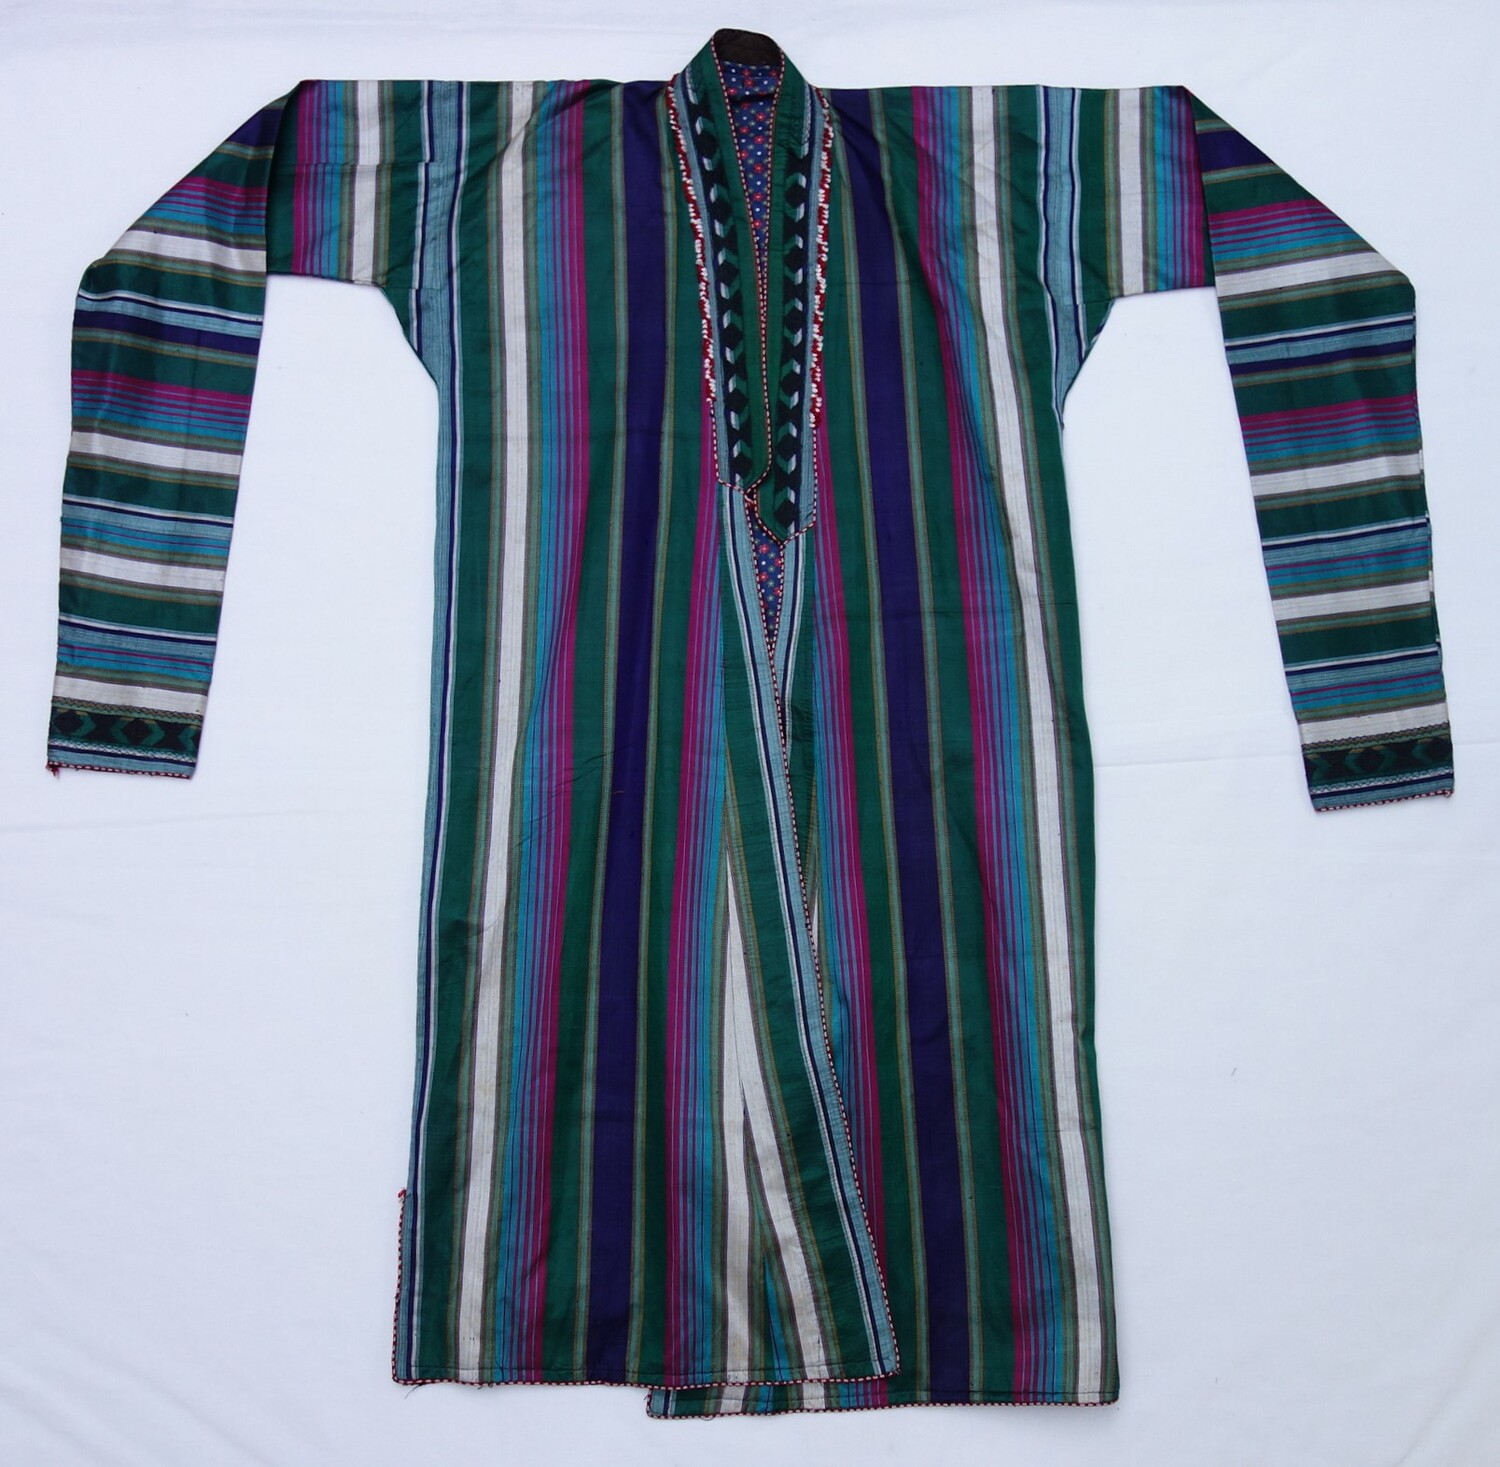 Silk and cotton chapan from Afghanistan, 1970s (TRC 2020.0218).